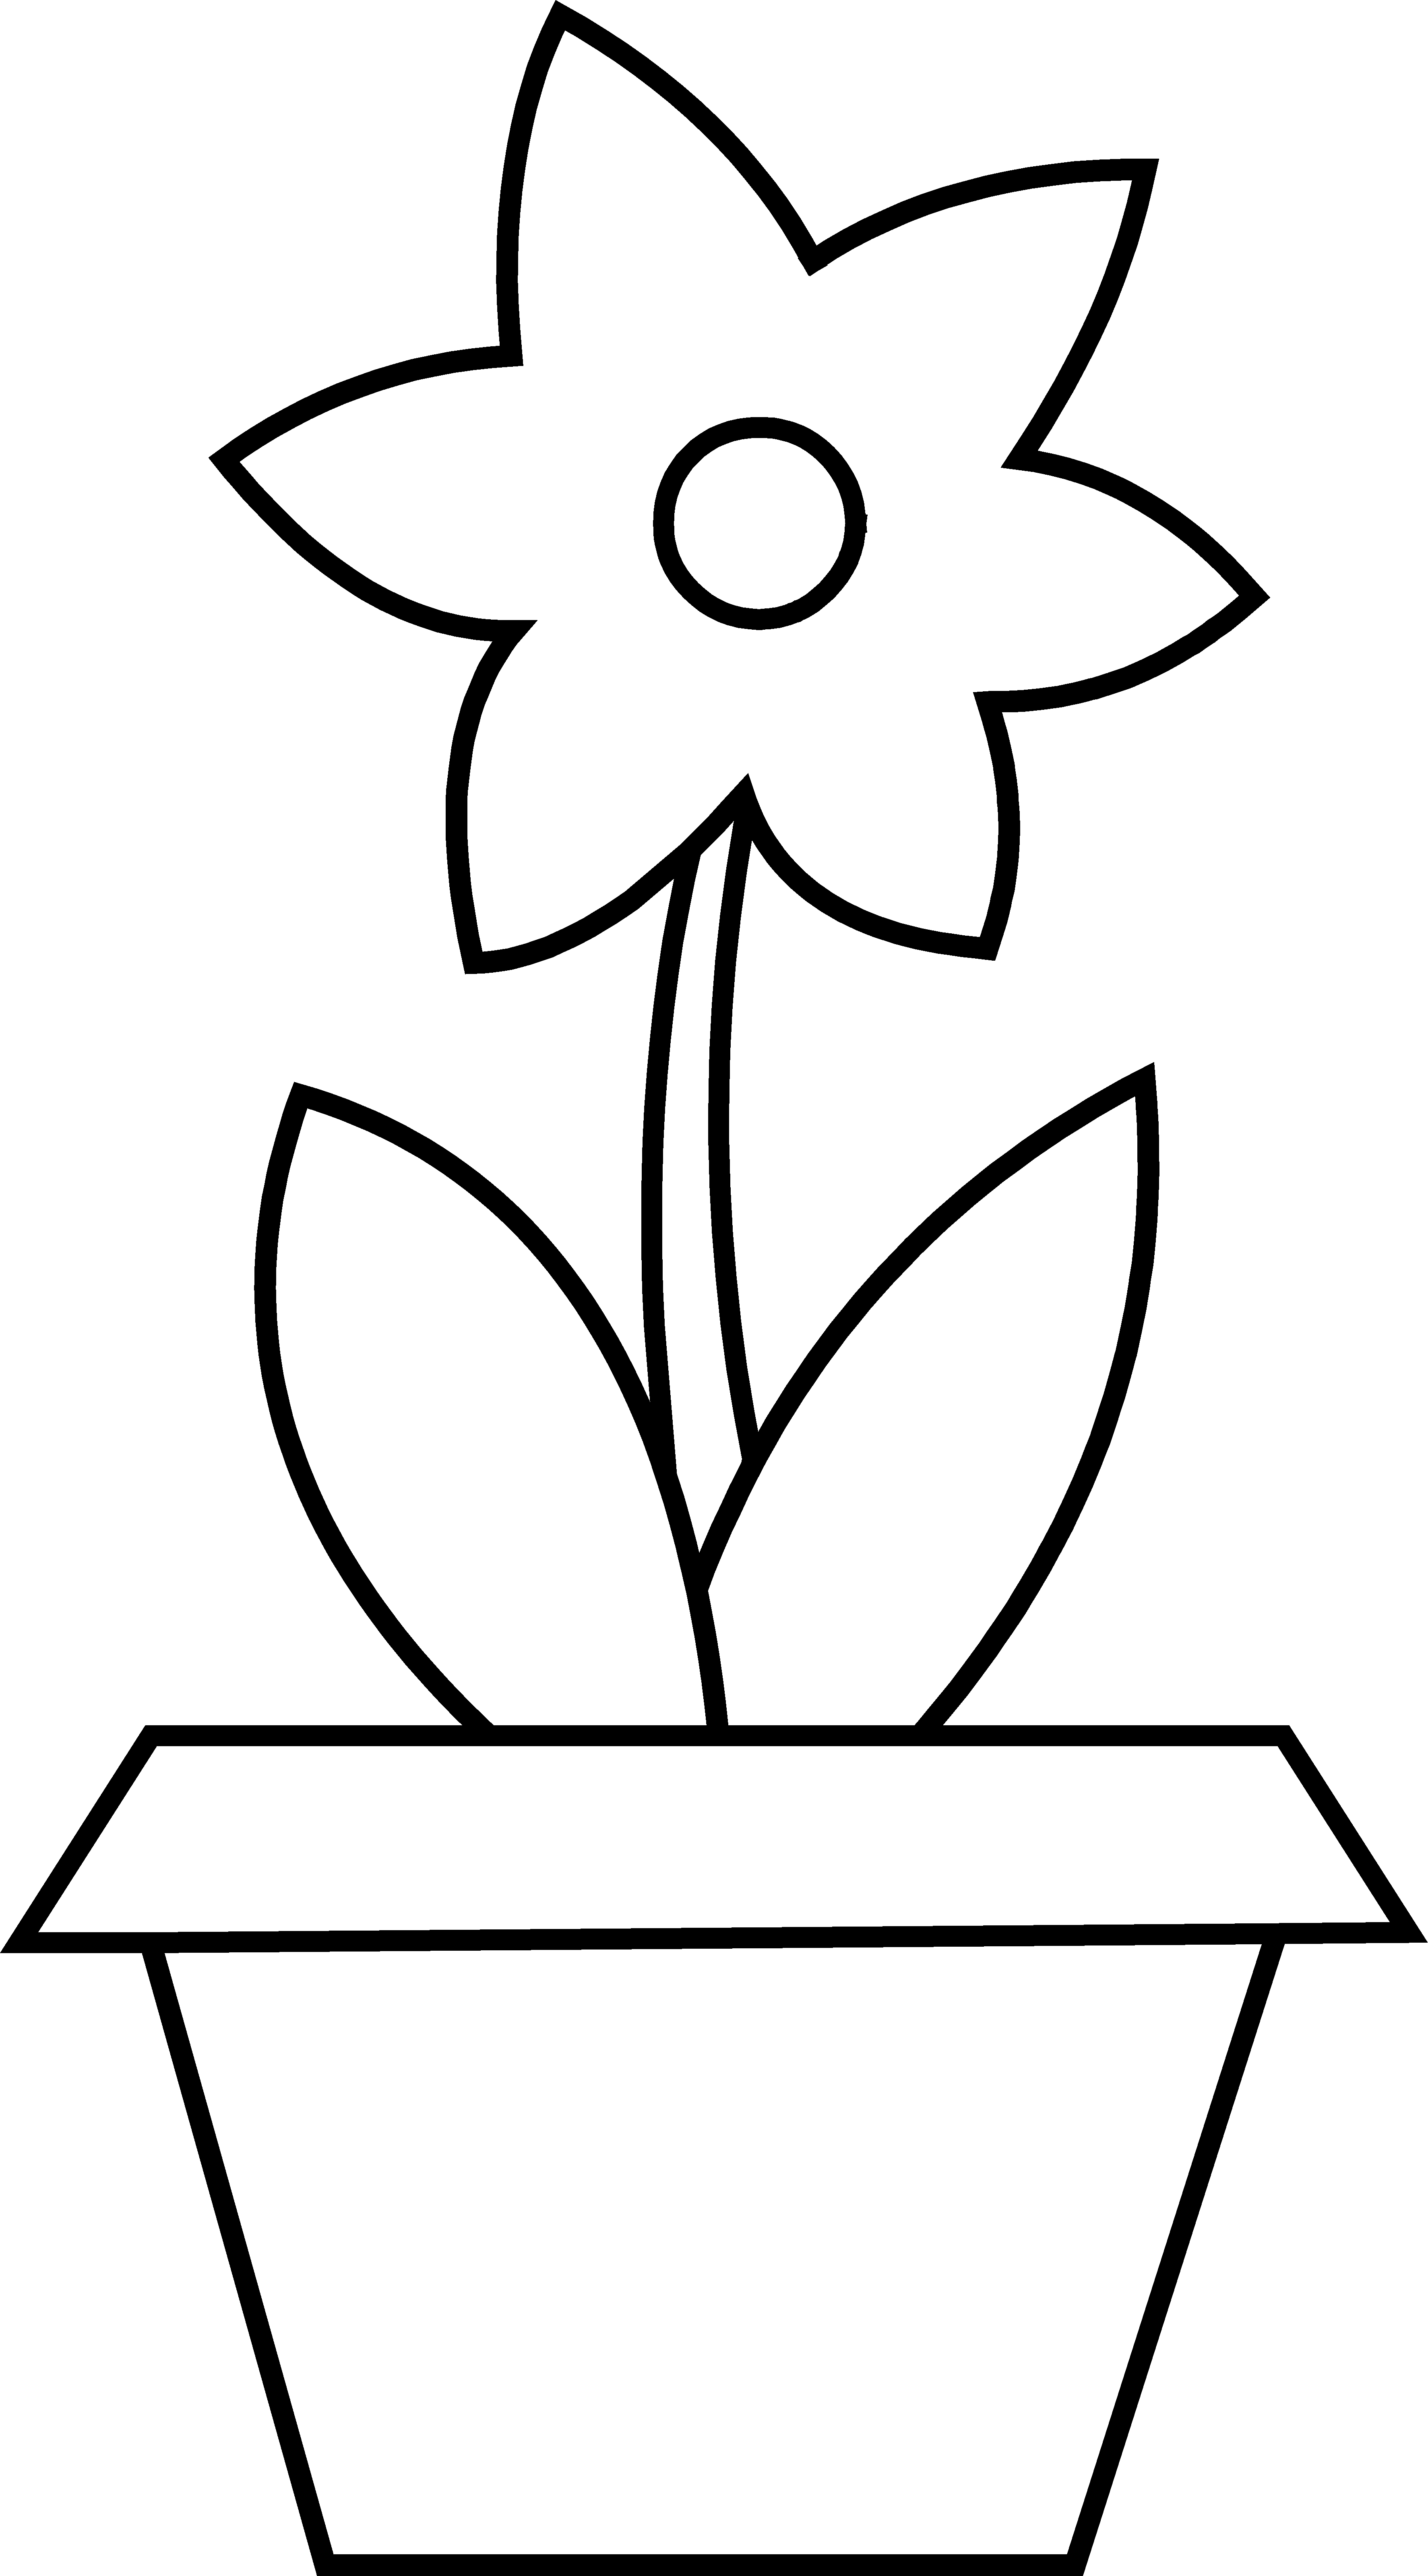 Featured image of post Flower Pot Design Black And White / Perfect for adding natural greenery and a color.